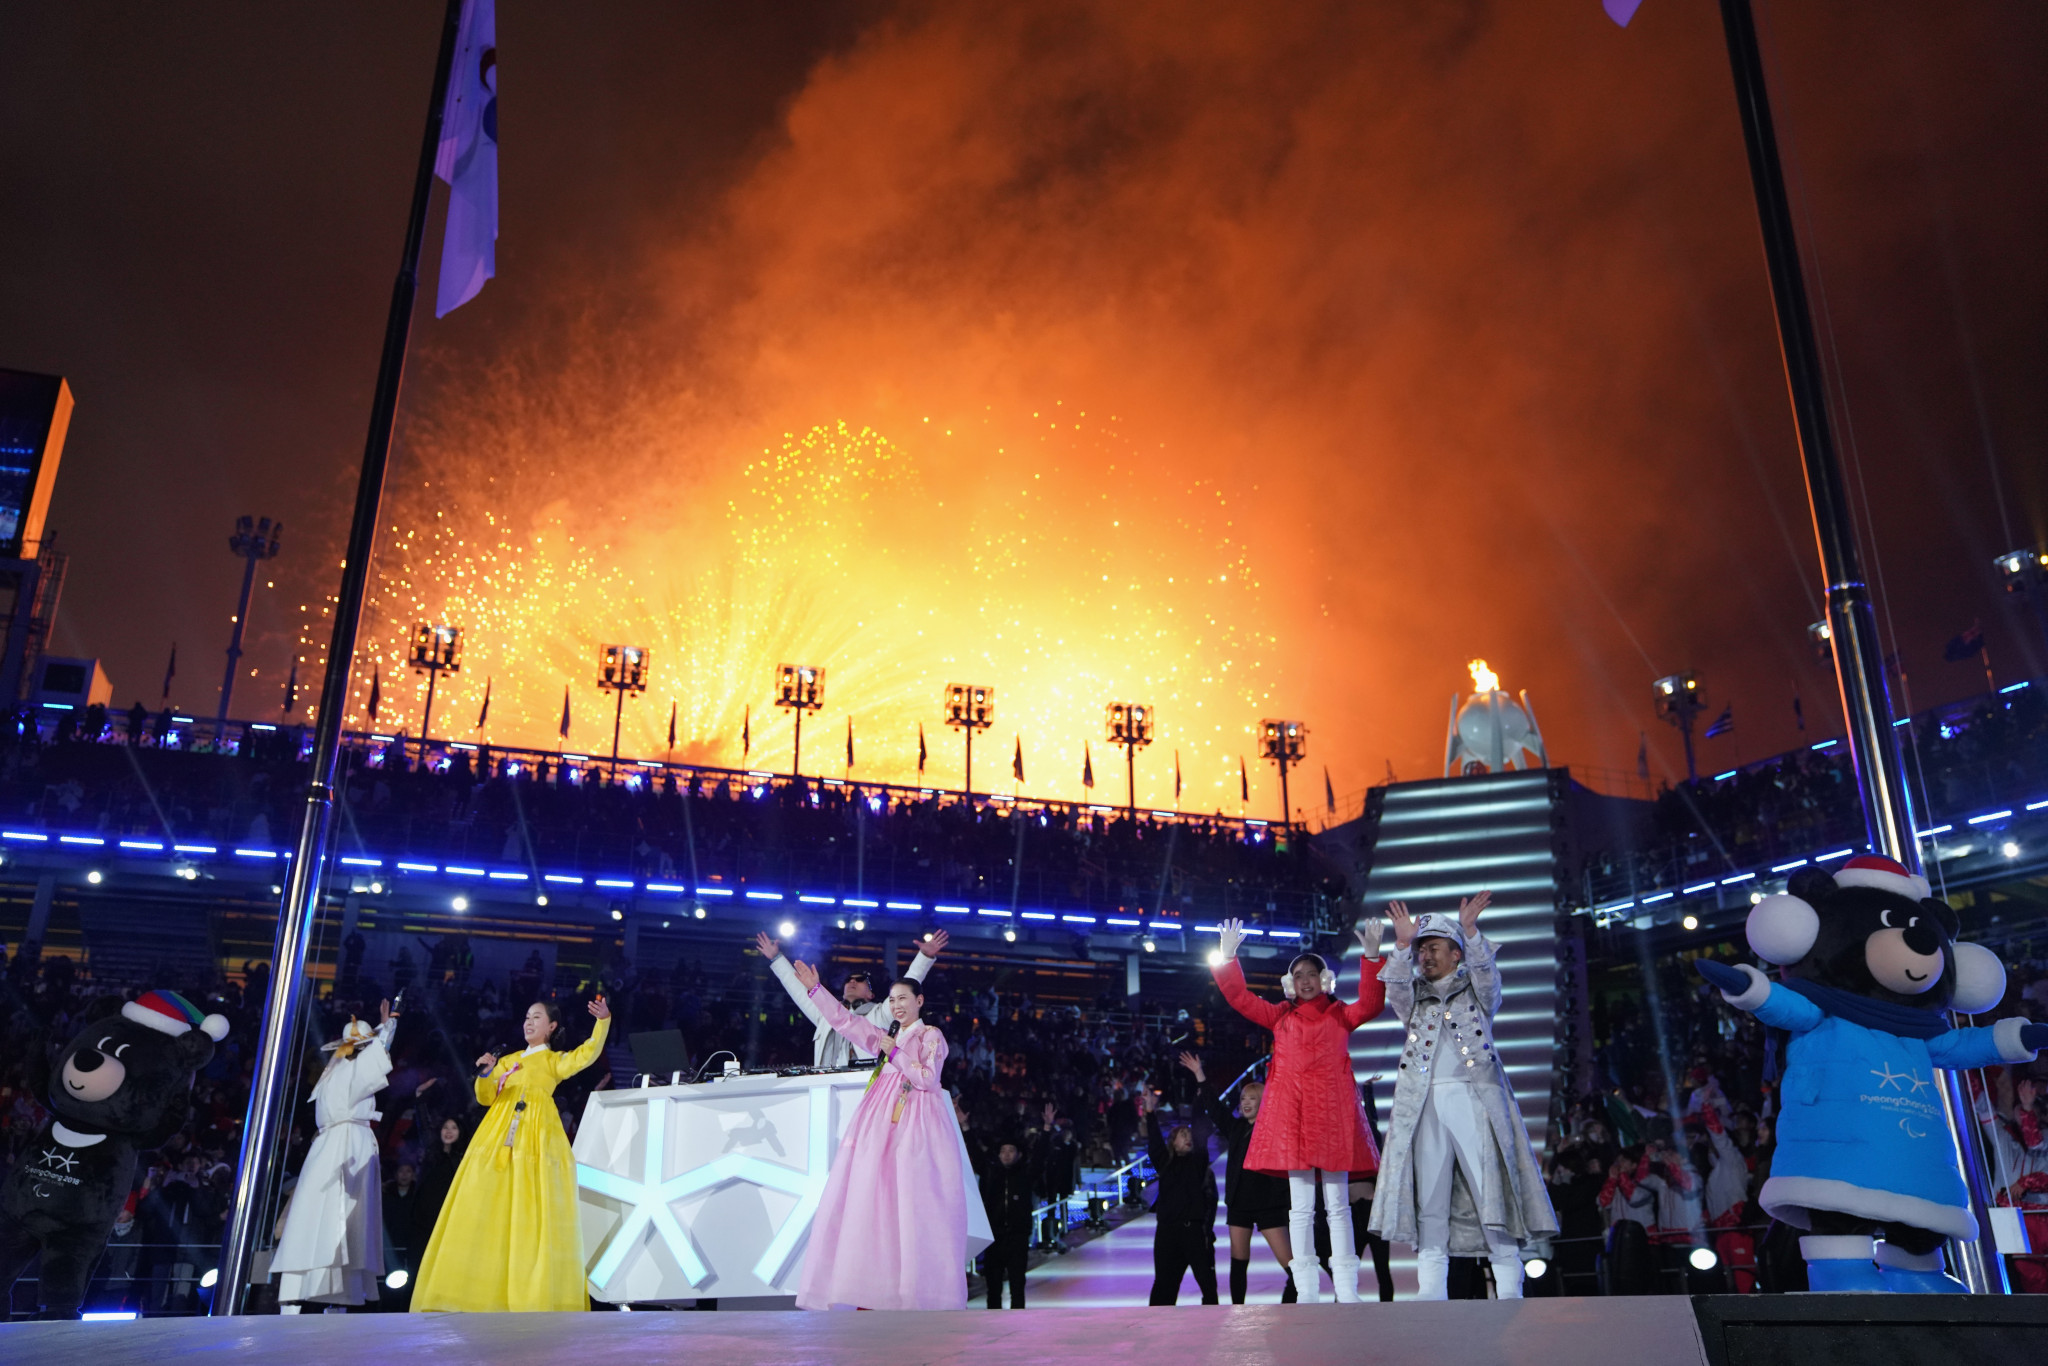 The Opening Ceremony of the Pyeongchang 2018 Winter Paralympics had a crowd of 21,000 ©Getty Images